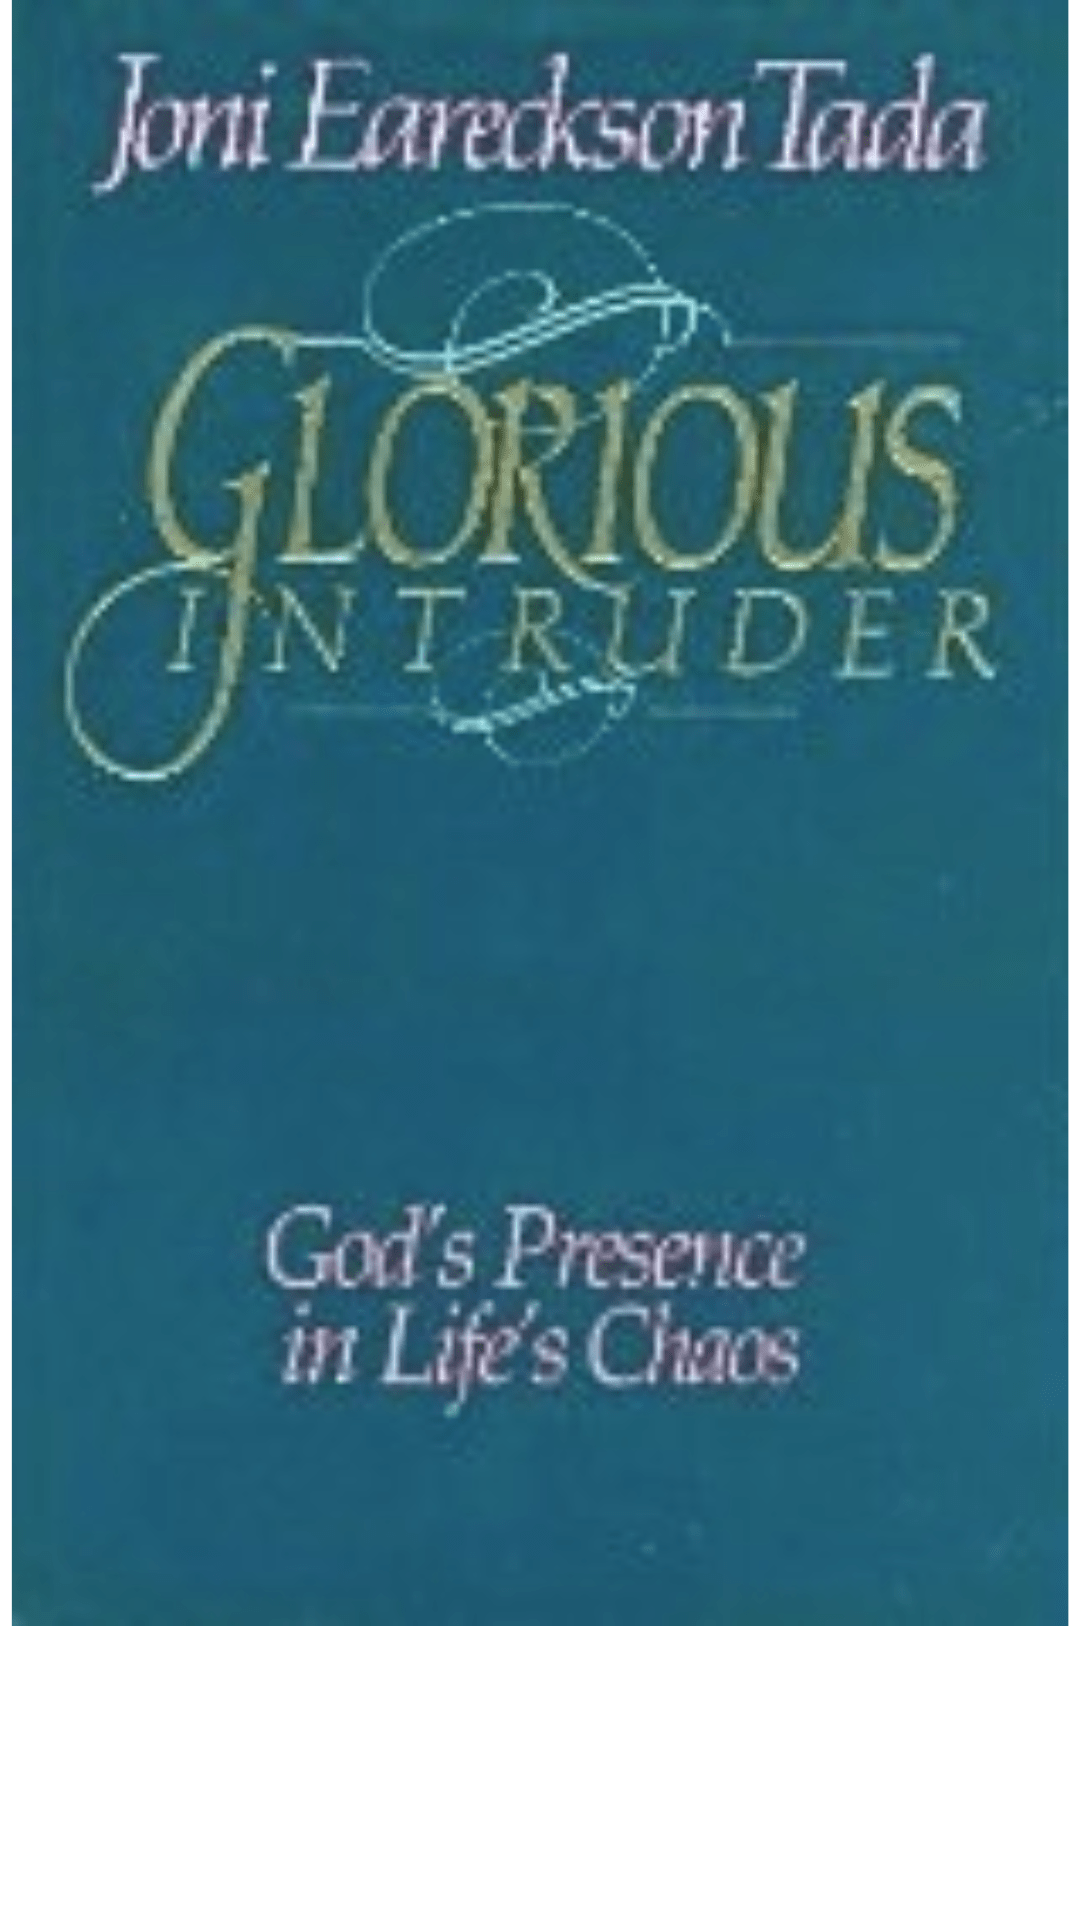 Glorious Intruder : God's Presence in Life's Chaos